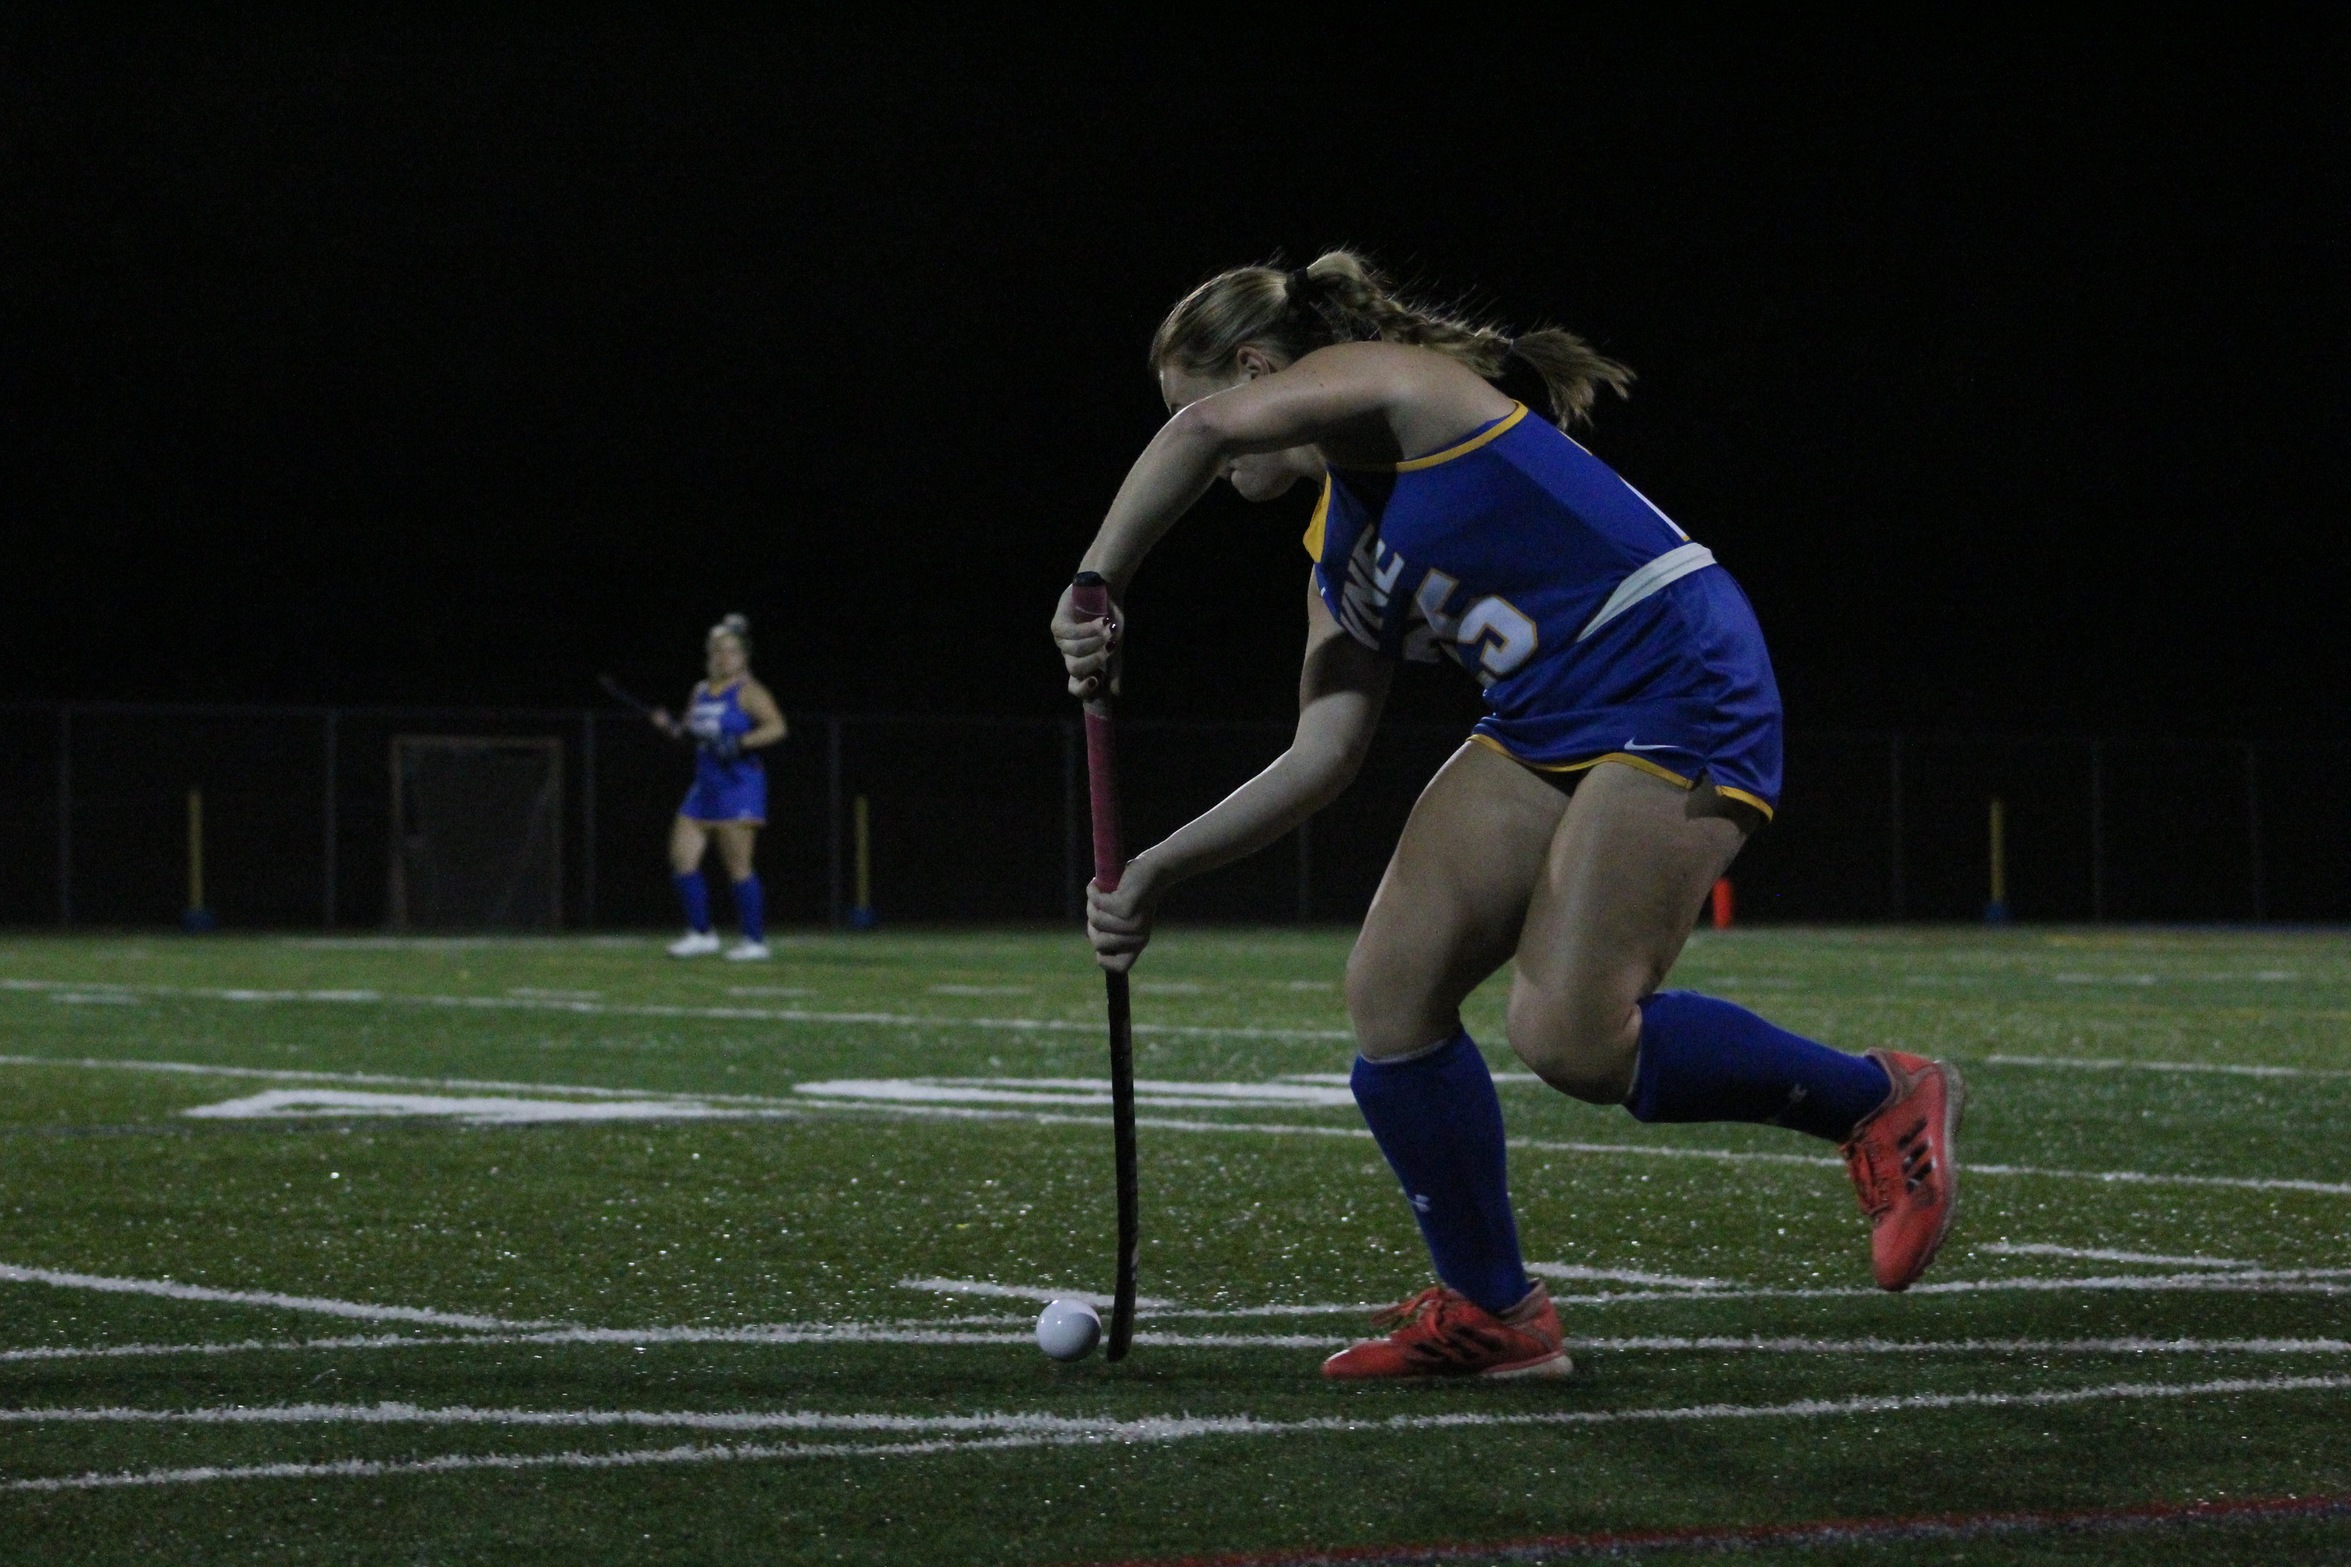 Miguel’s Game Winning First Career Goal Gives Field Hockey 2-1 Win over Mount Holyoke